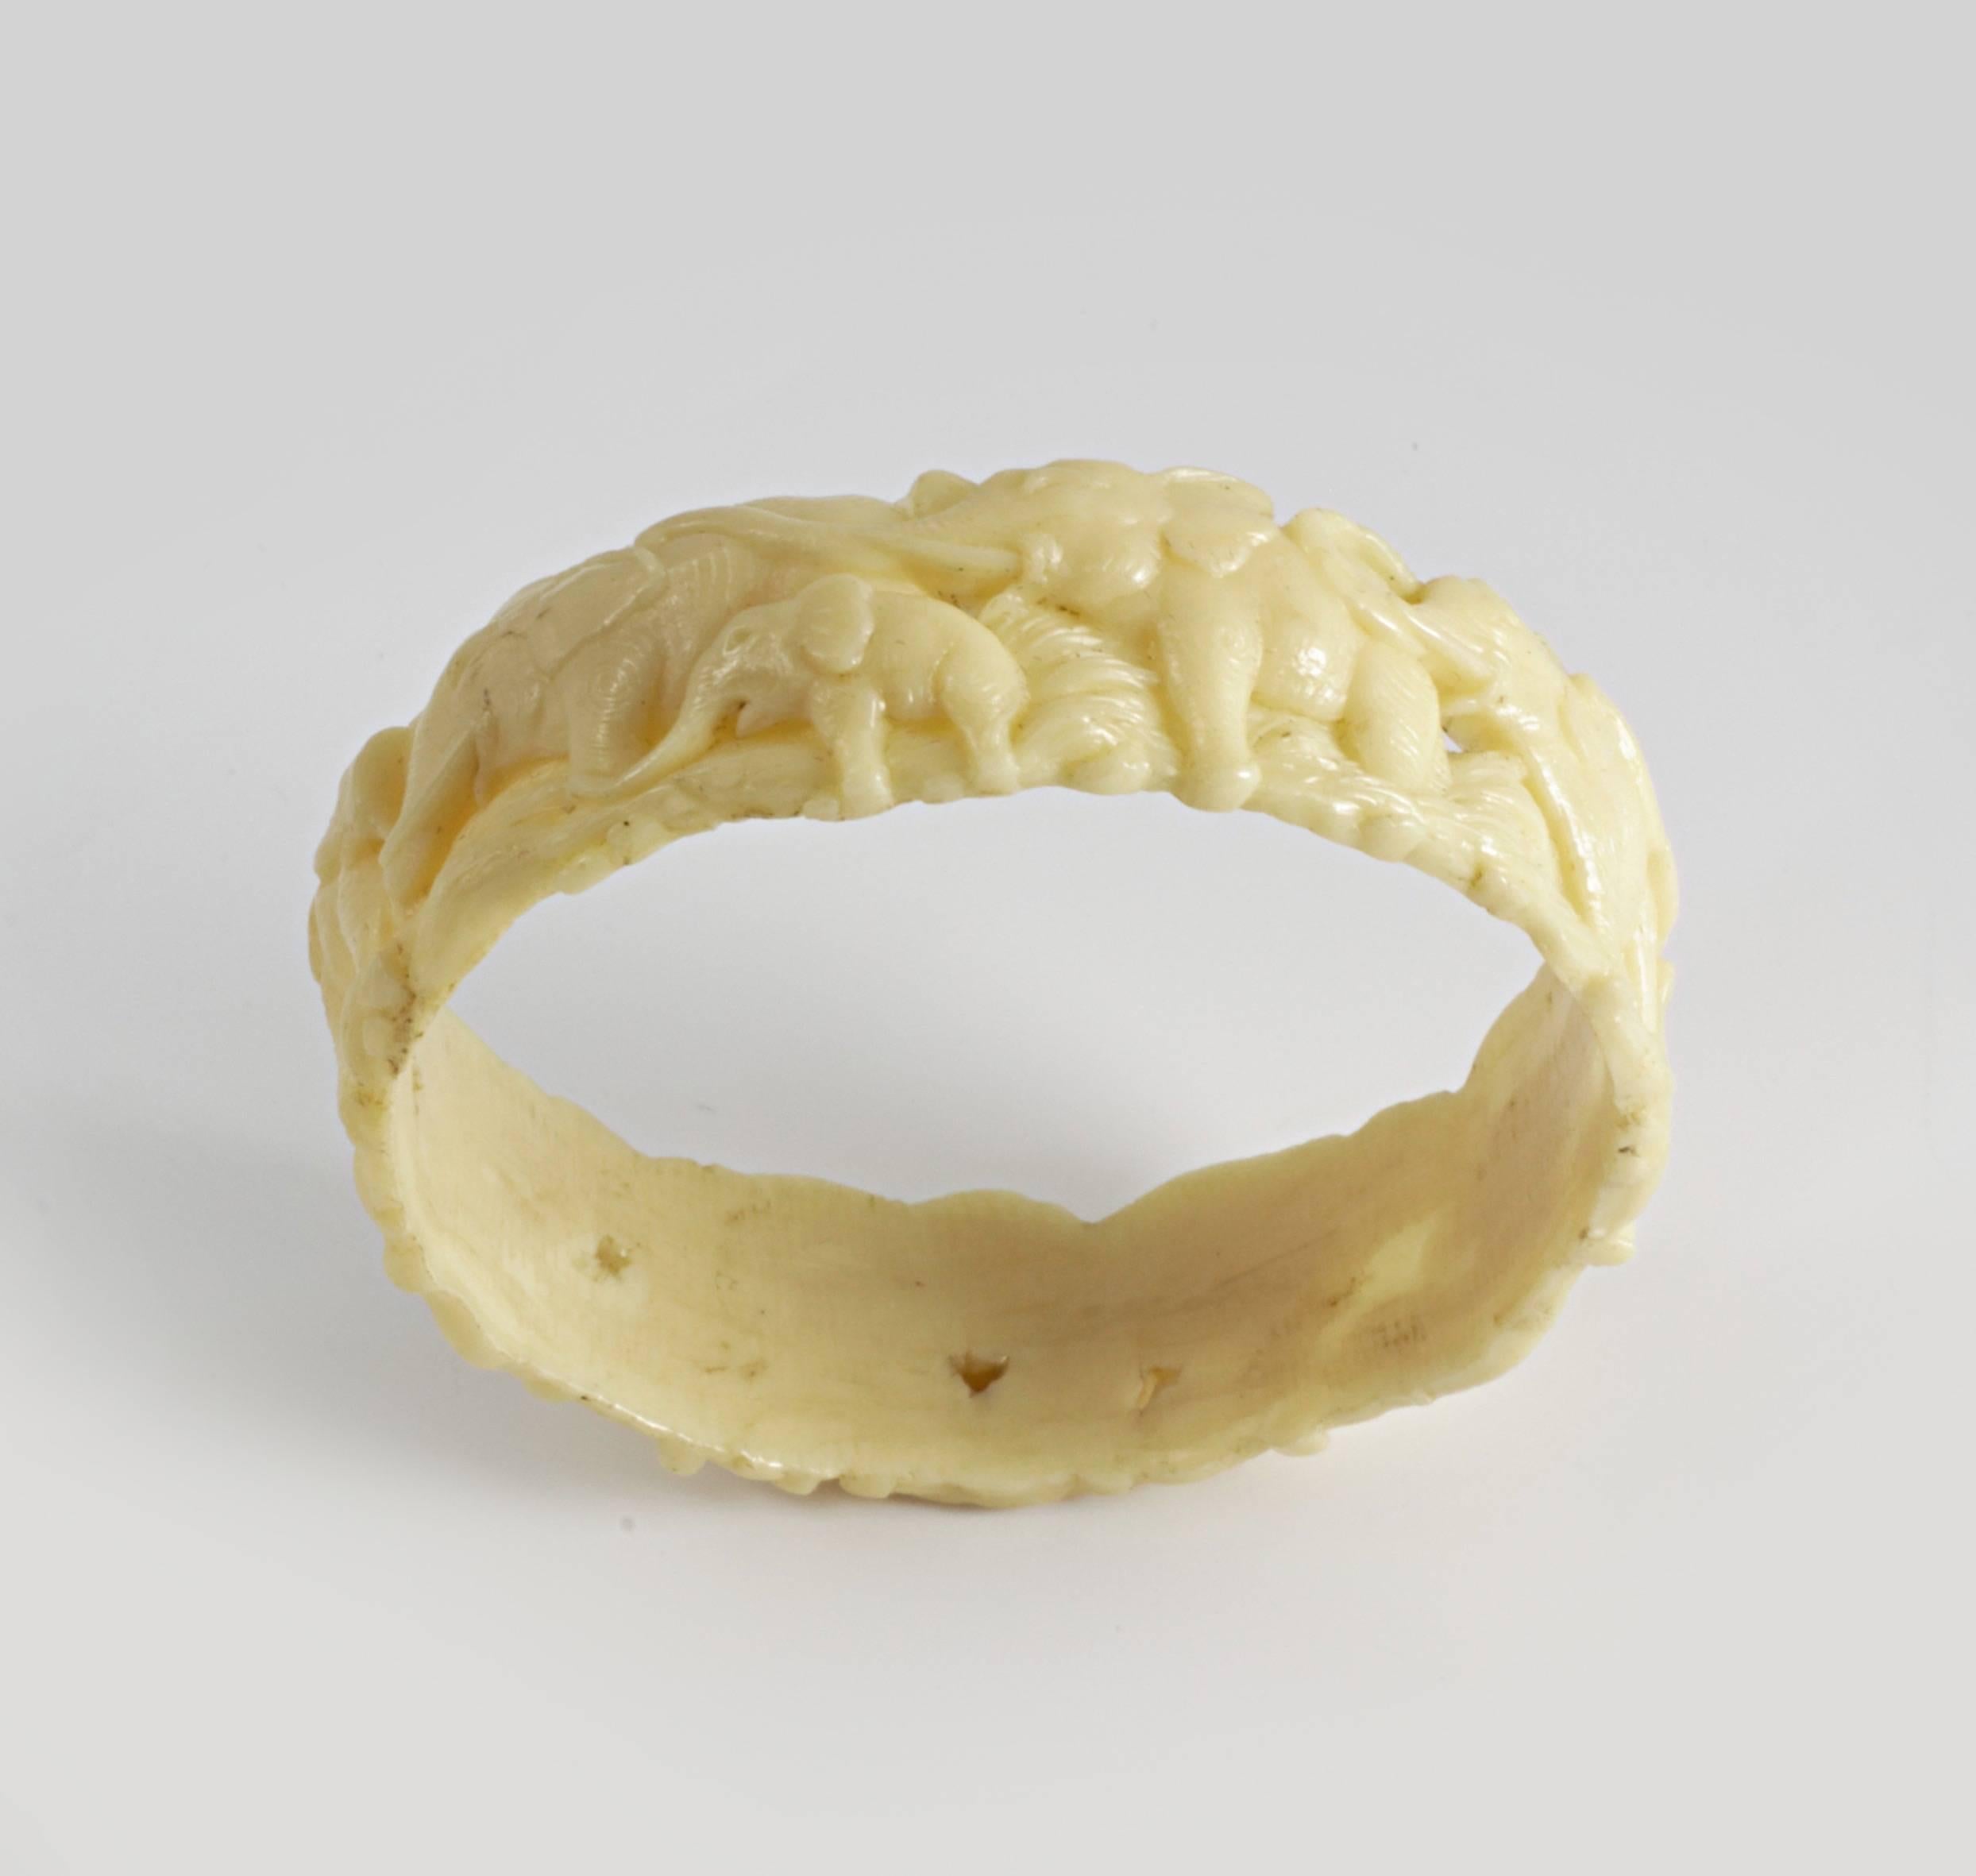 Beautiful highly moulded Ivory coloured Celluloid bangle, made in Japan in the 1930′s, complete with vertical join.

The bangle depicts a herd or parade of Elephant and baby elephants, all with their trunks facing upwards representing good luck.

A